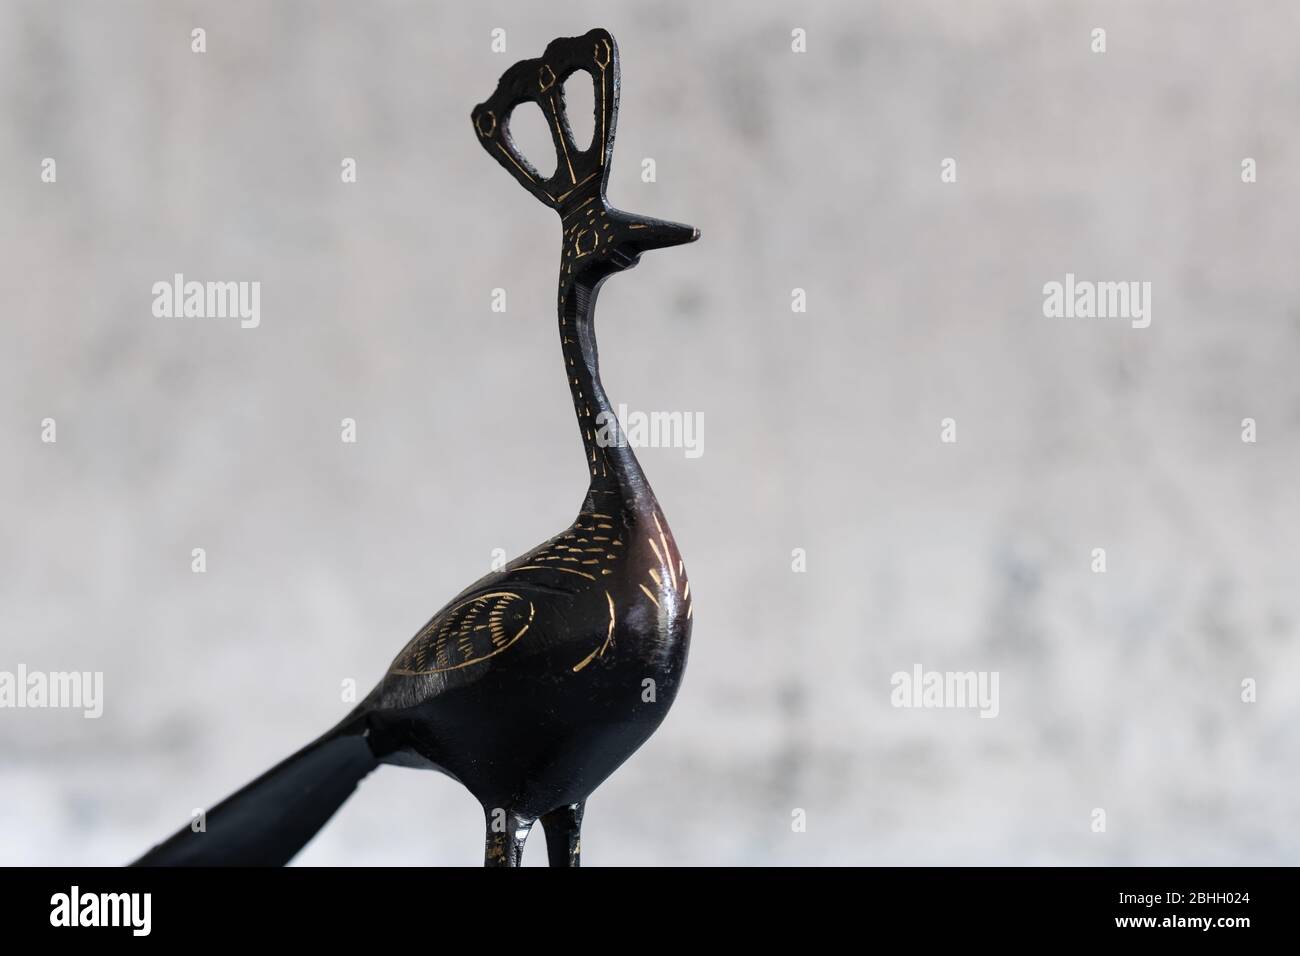 black color metal Peacock sculpture on white background Stock Photo